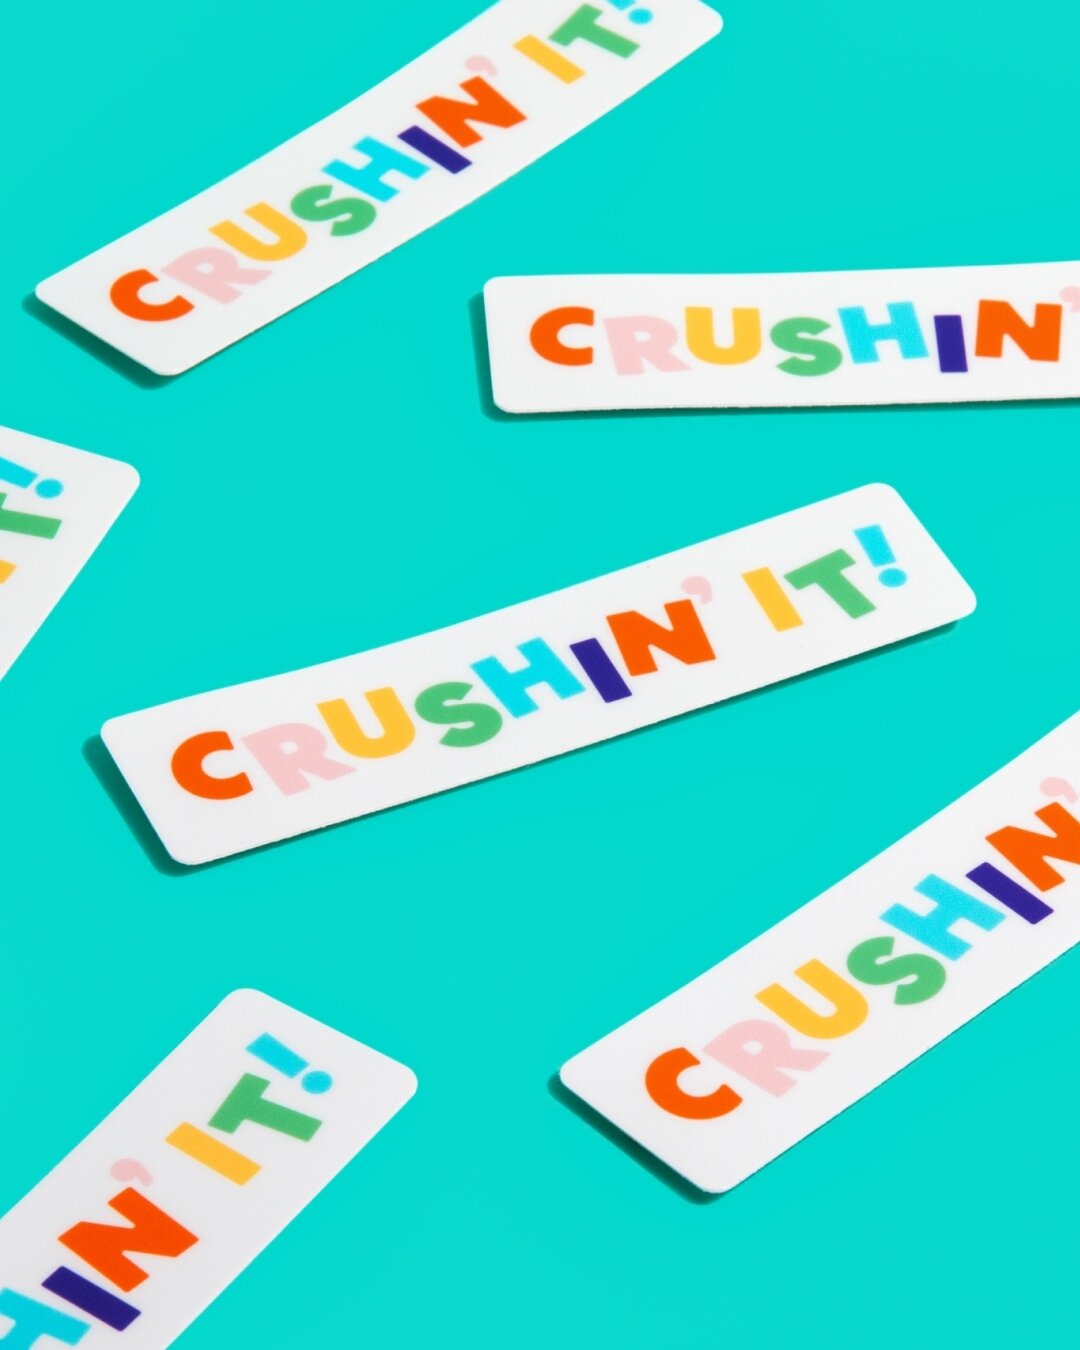 Hey there champ! 😎 Crushing it lately? We know you are! Show the world you're on top of your game with our Crushin' It! sticker. Perfect for laptops, water bottles, and anywhere else you want to flex those goal-crushing muscles.

#CrushinIt! #Motiva